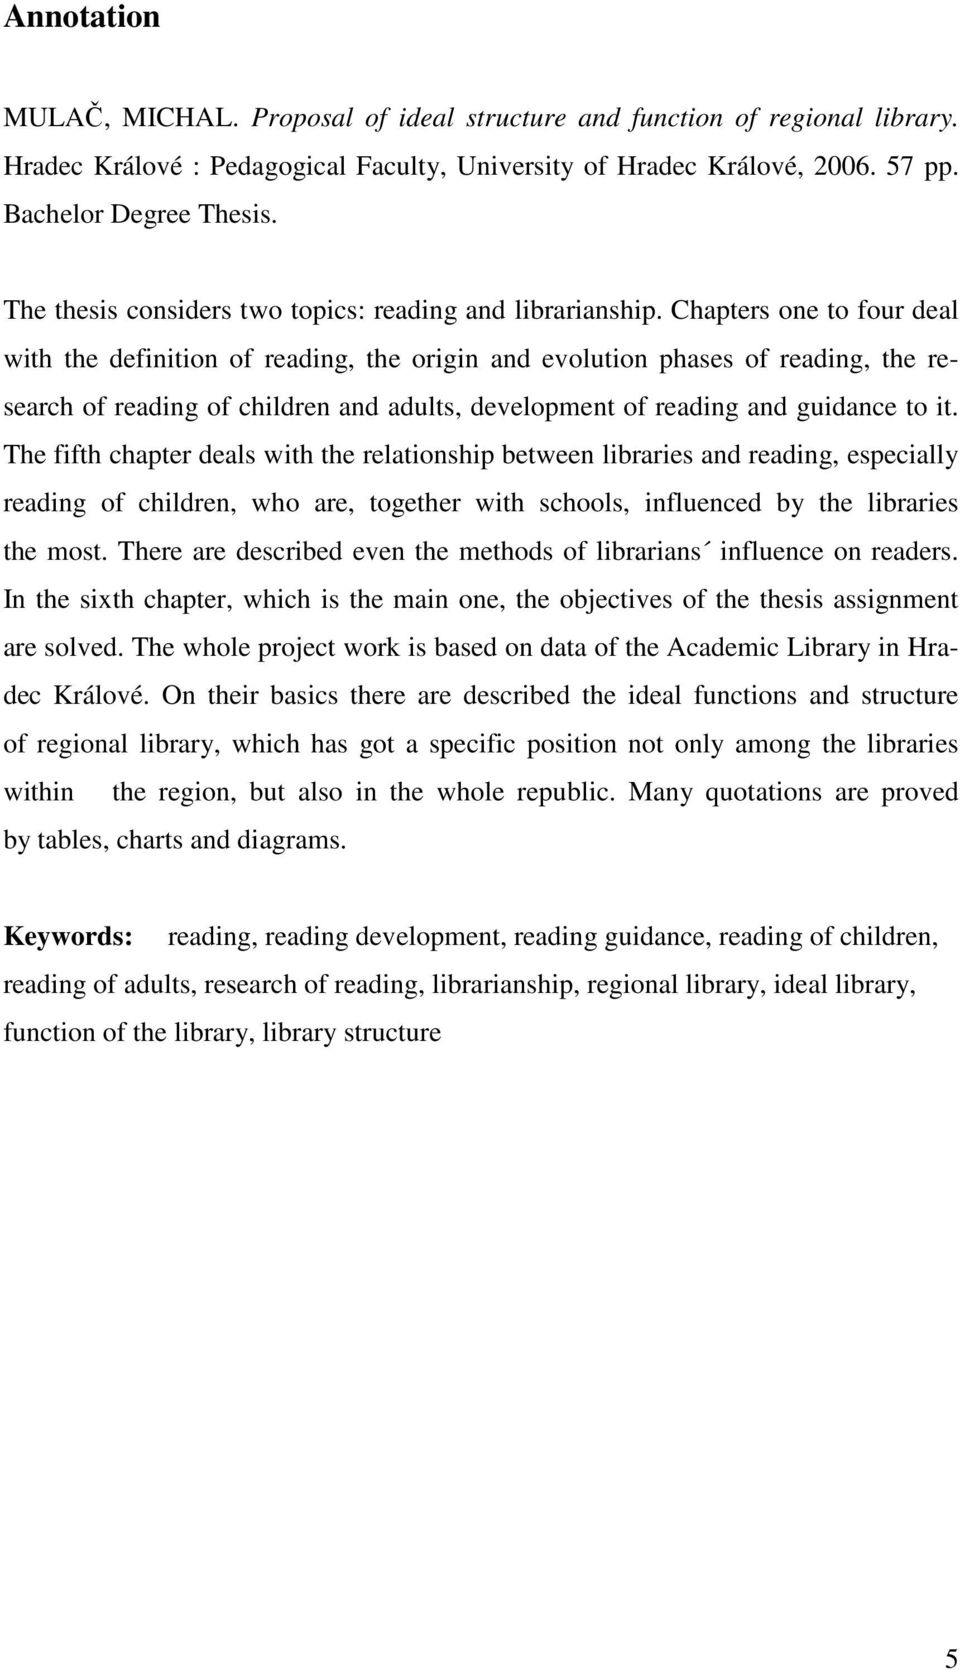 Chapters one to four deal with the definition of reading, the origin and evolution phases of reading, the research of reading of children and adults, development of reading and guidance to it.